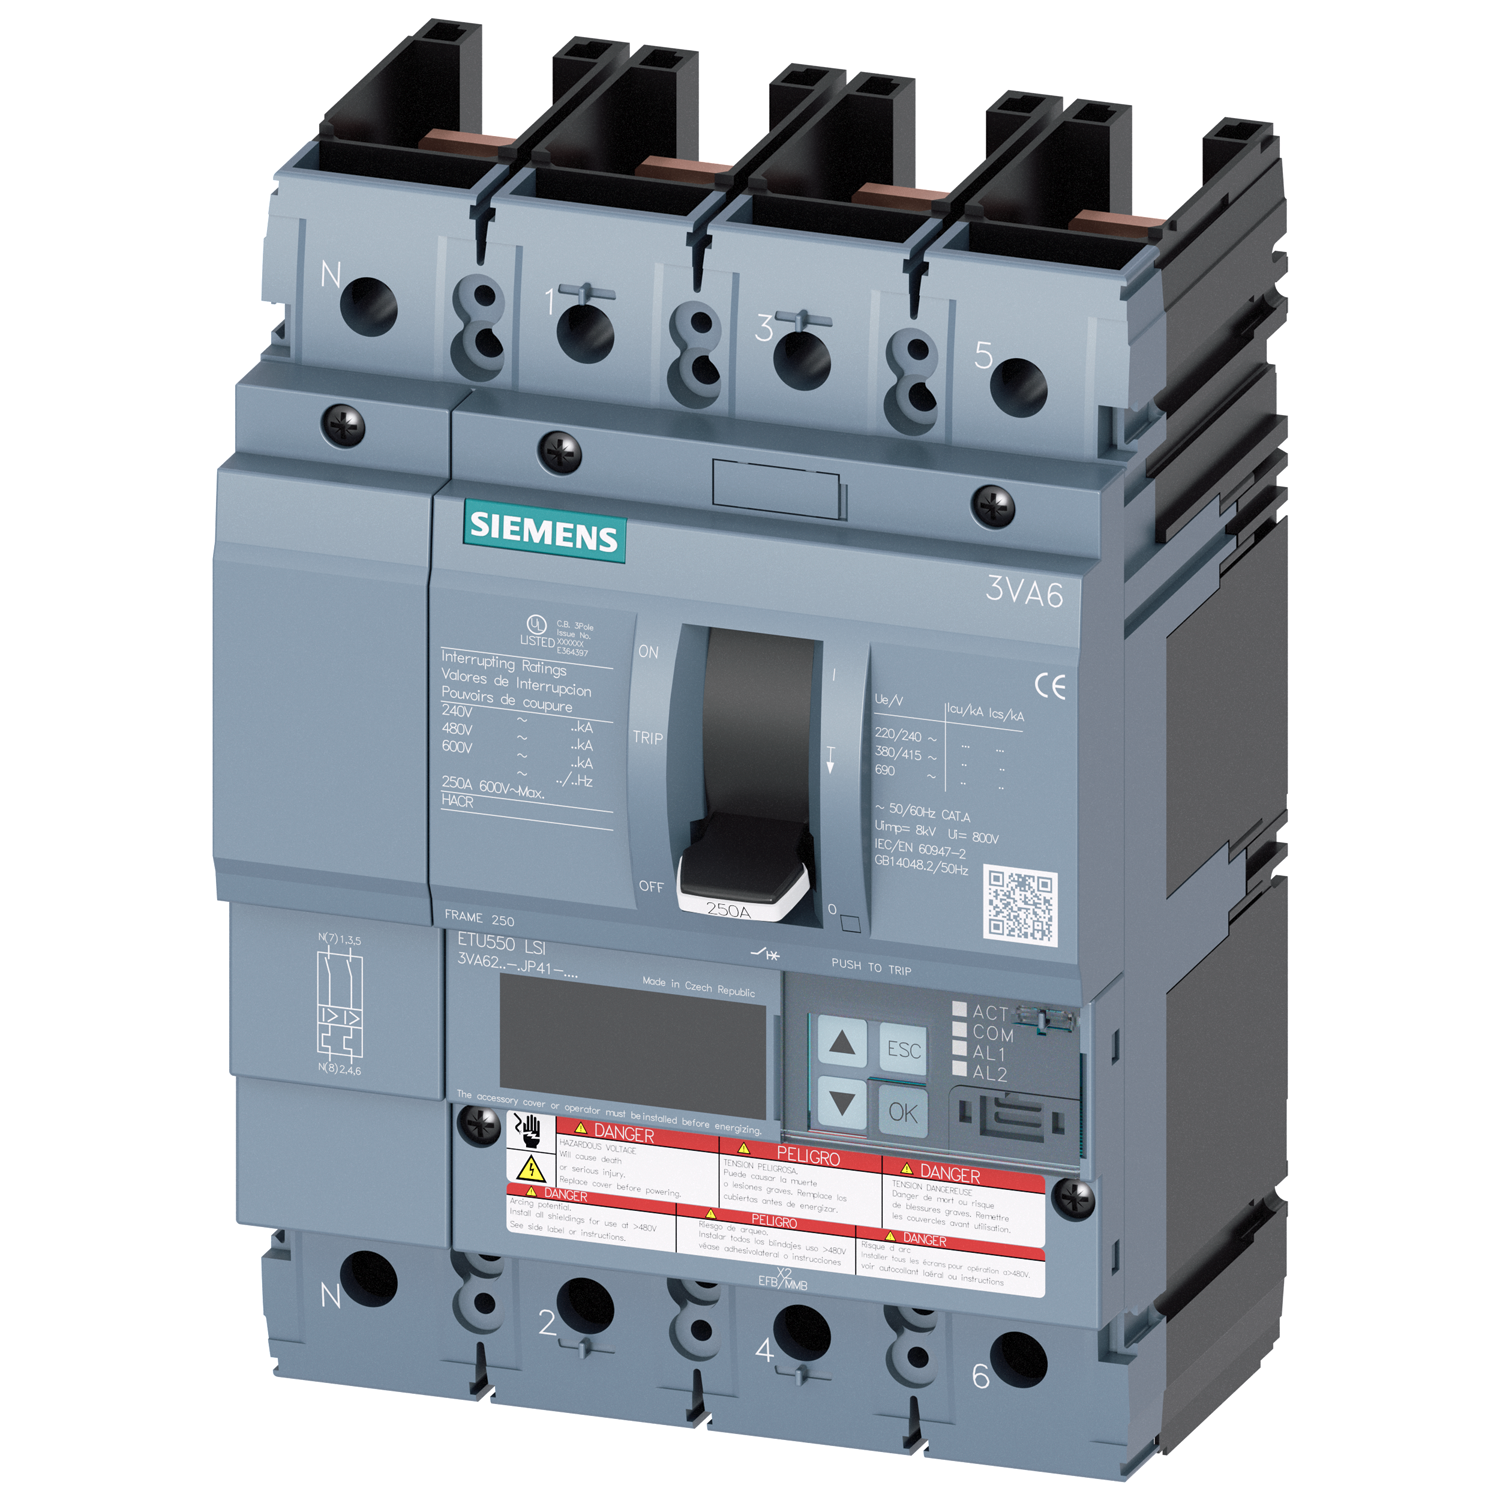 SIEMENS LOW VOLTAGE 3VA UL MOLDED CASE CIRCUIT BREAKER WITH ELECTRONIC TRIP UNIT. 3VA62 FRAME WITH MEDIUM HIGH (CLASS C) BREAKING CAPACITY. 100A 4-POLE (35KAICAT 600V) (100KAIC AT 480V). ETU550 TRIP UNIT LCD LSI. SPECIAL FEATURES WITHOUT LUGS.. DIMENSIONS (W x H x D) IN 5.5 x 7.8 x 4.2.